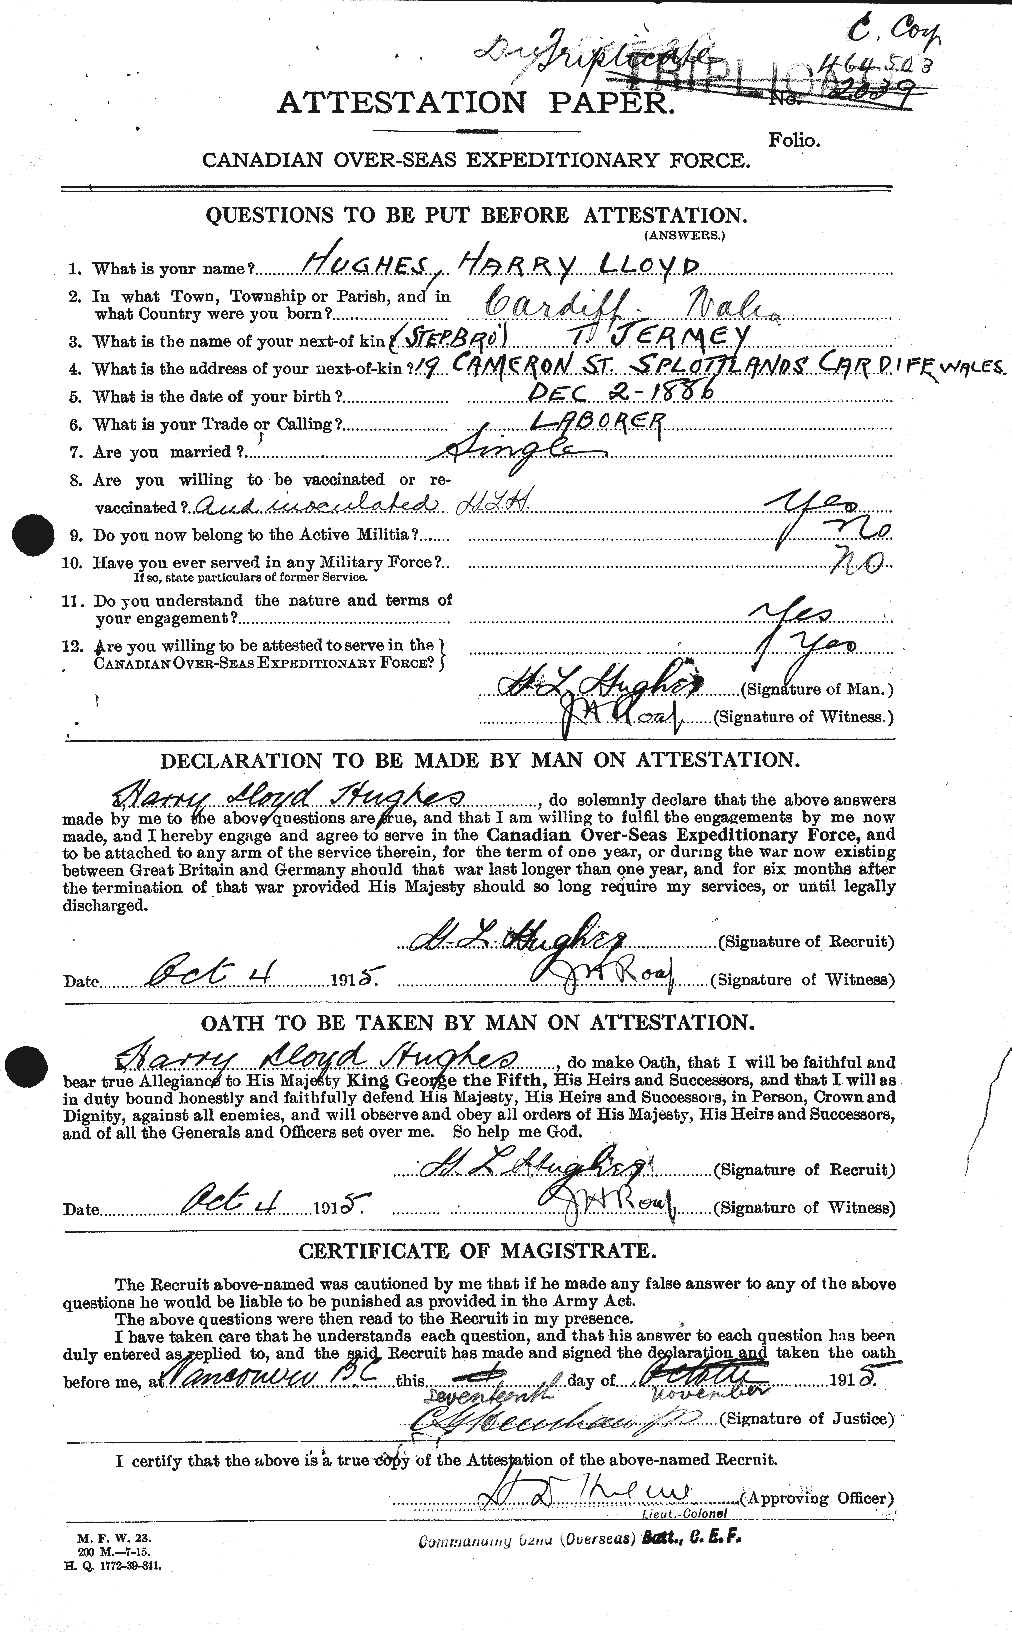 Personnel Records of the First World War - CEF 403873a